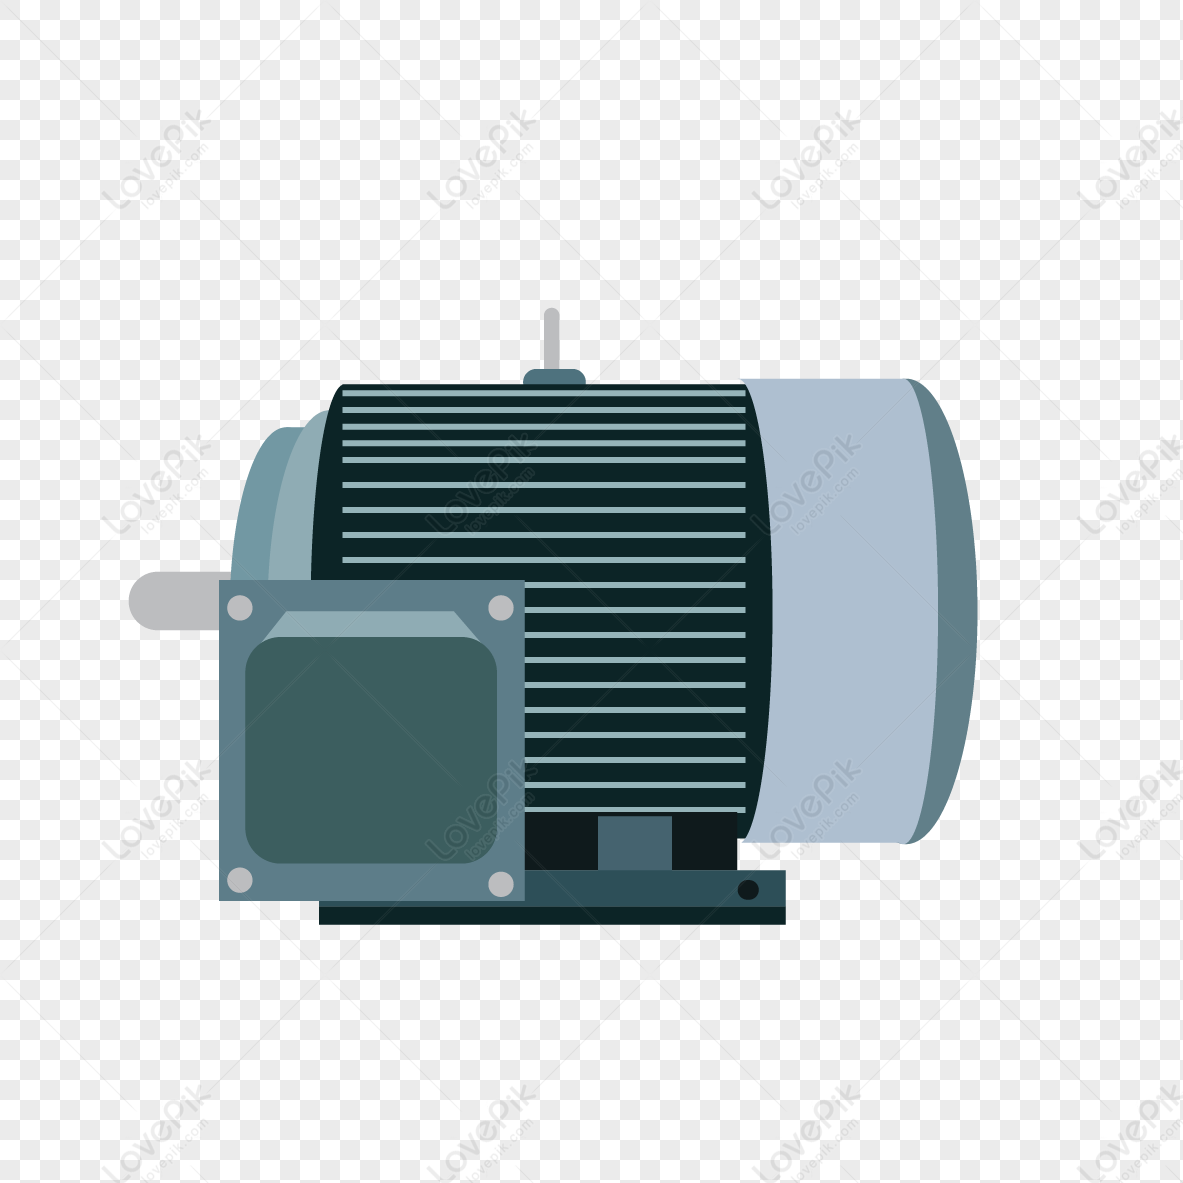 Motor PNG Transparent And Clipart Image For Free Download - Lovepik |  401694956